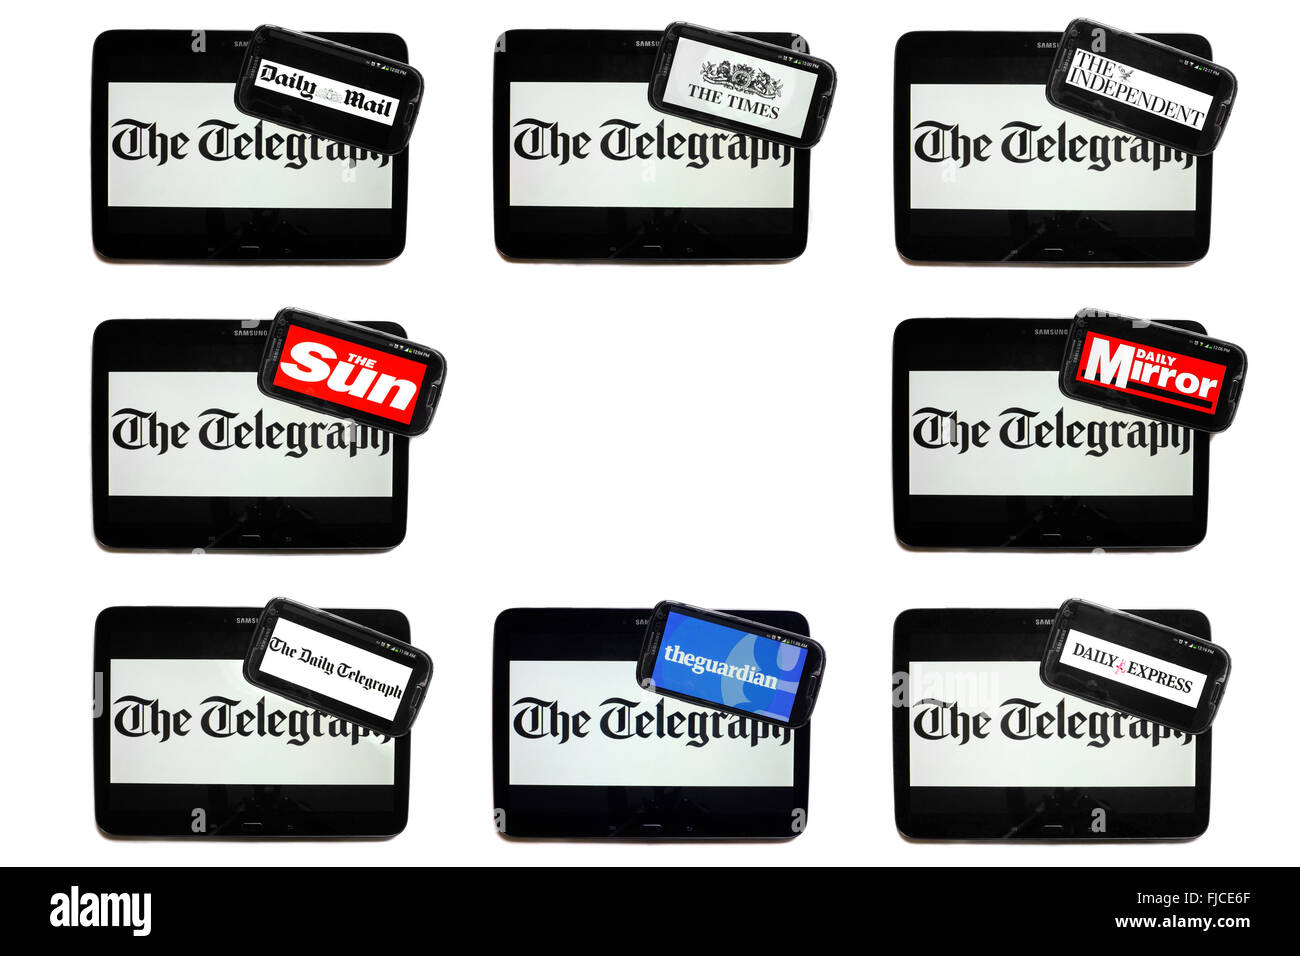 The Telegraph newspaper logo on tablet screens surrounded by smartphones displaying the logos of rival newspapers. Stock Photo